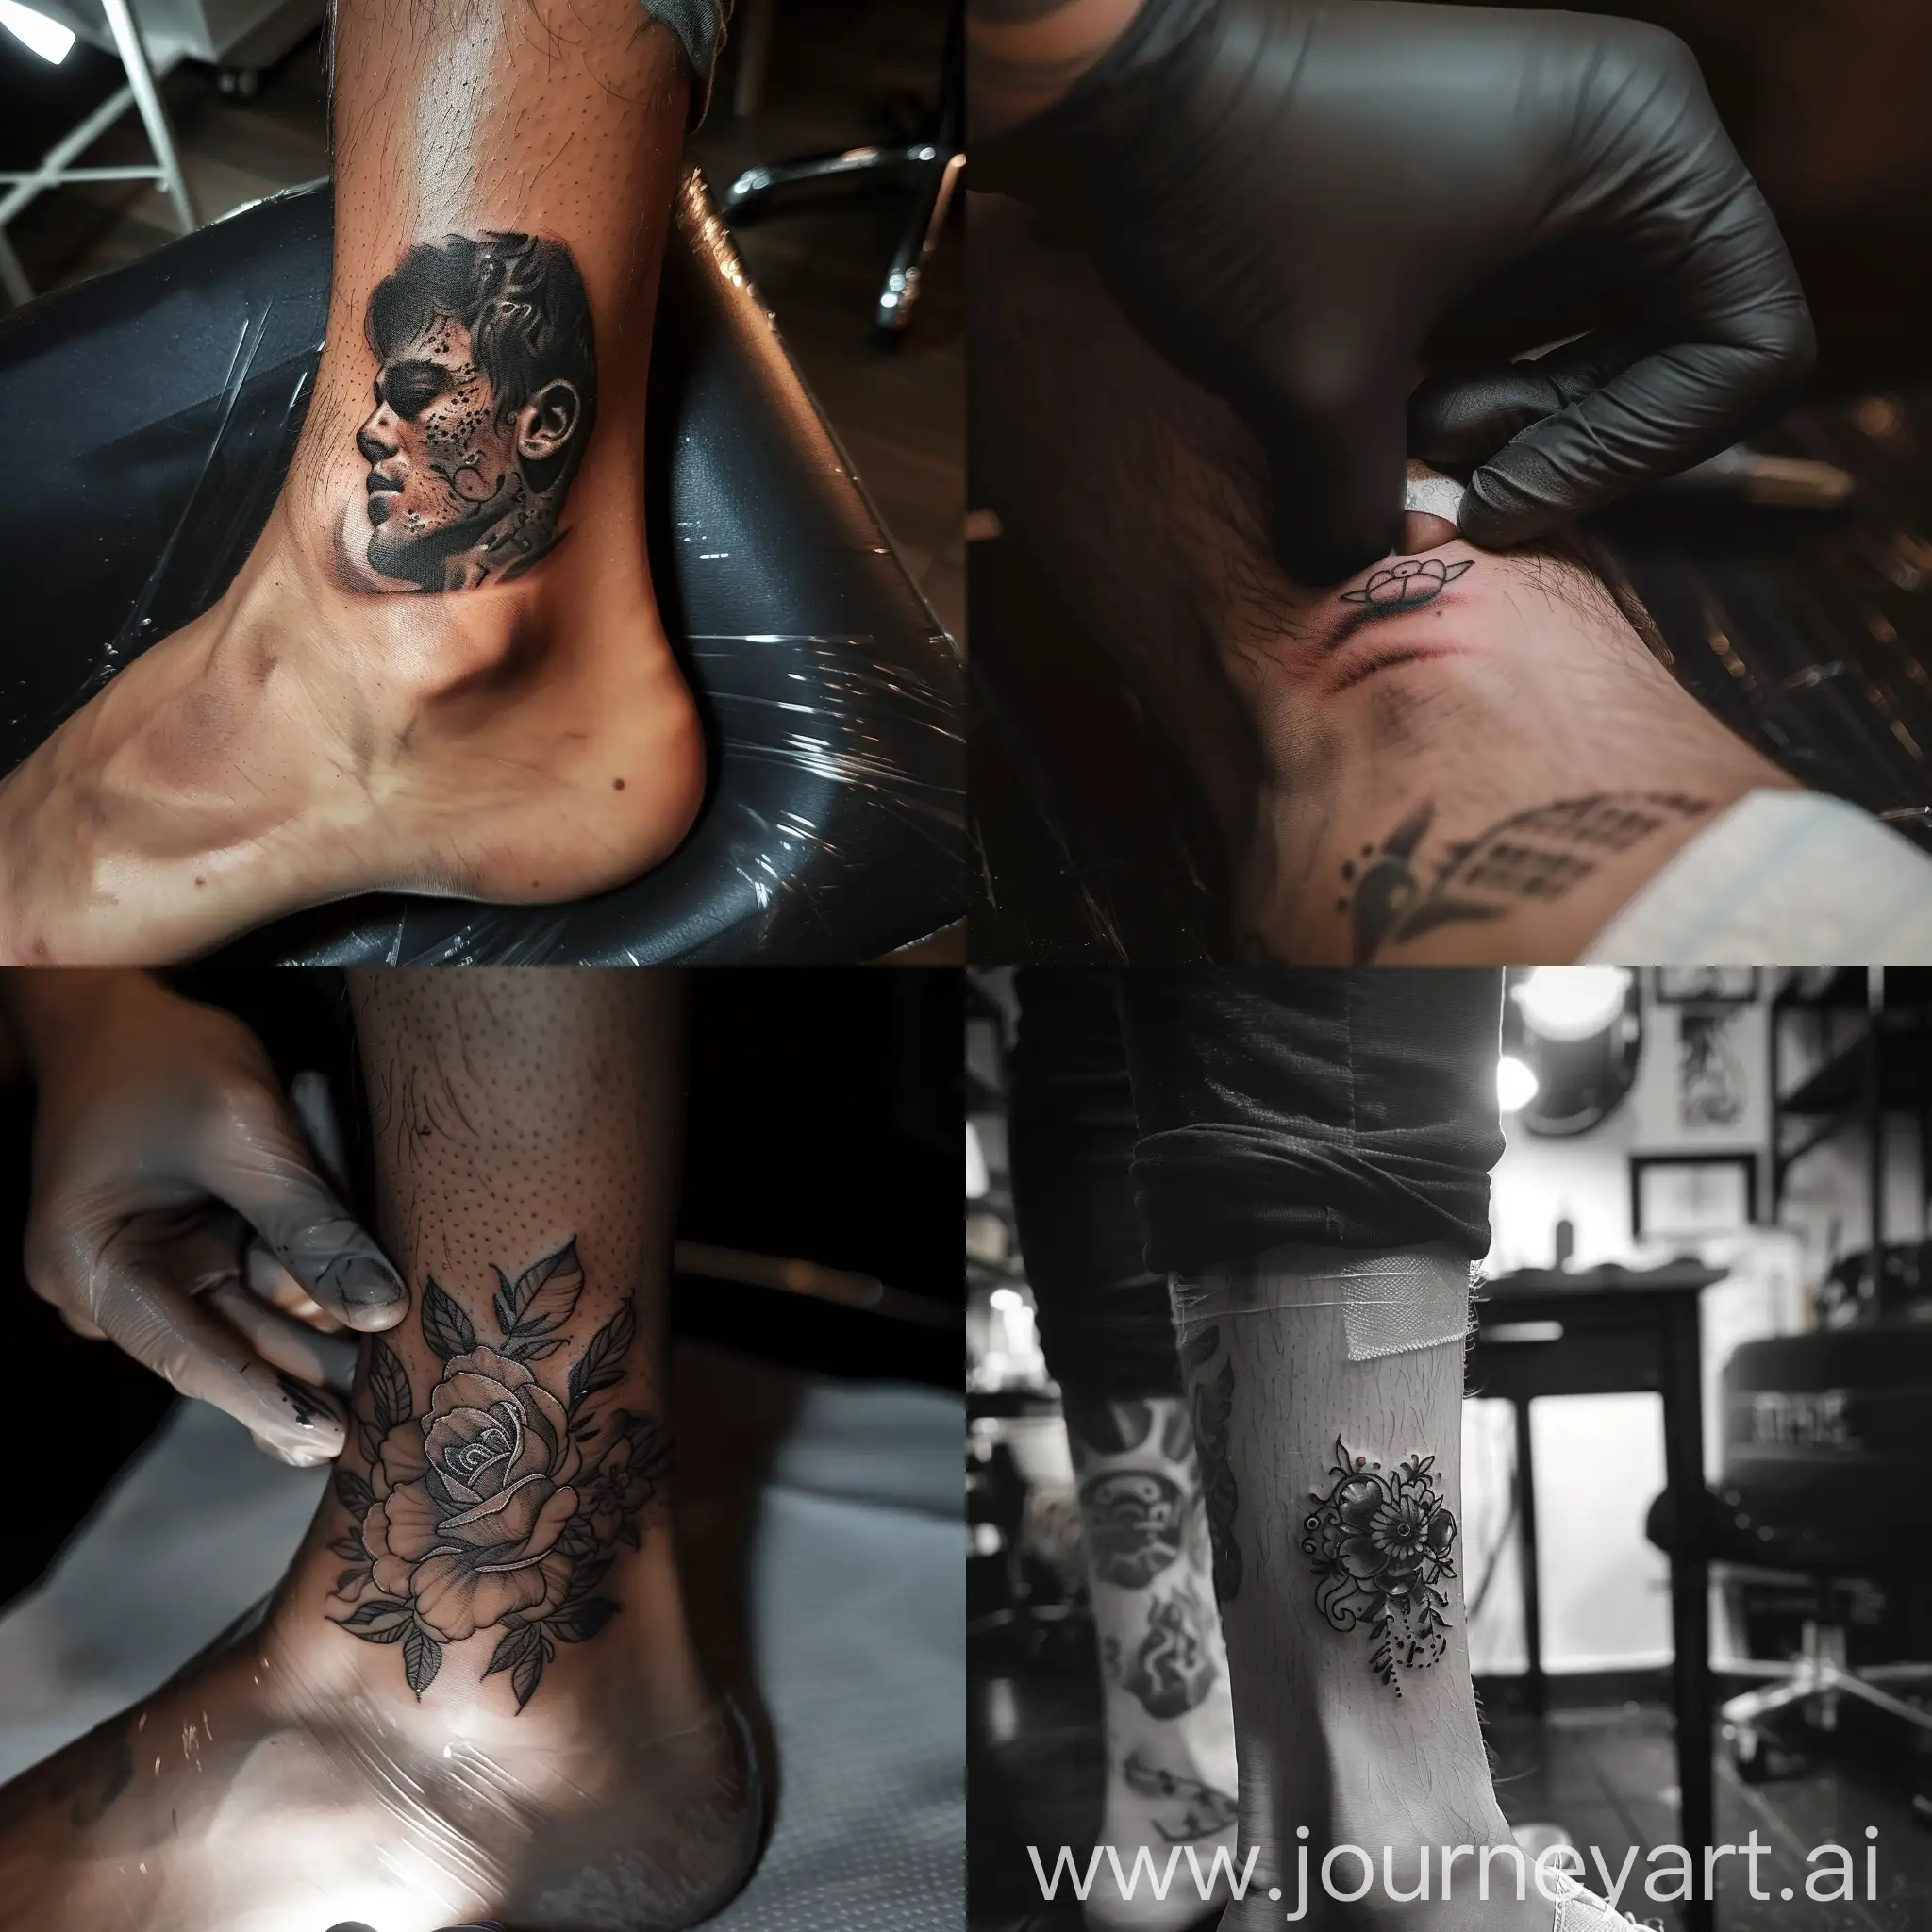 Closeup-Tattoo-Art-on-Young-Mans-Ankle-with-Cinematic-Lighting